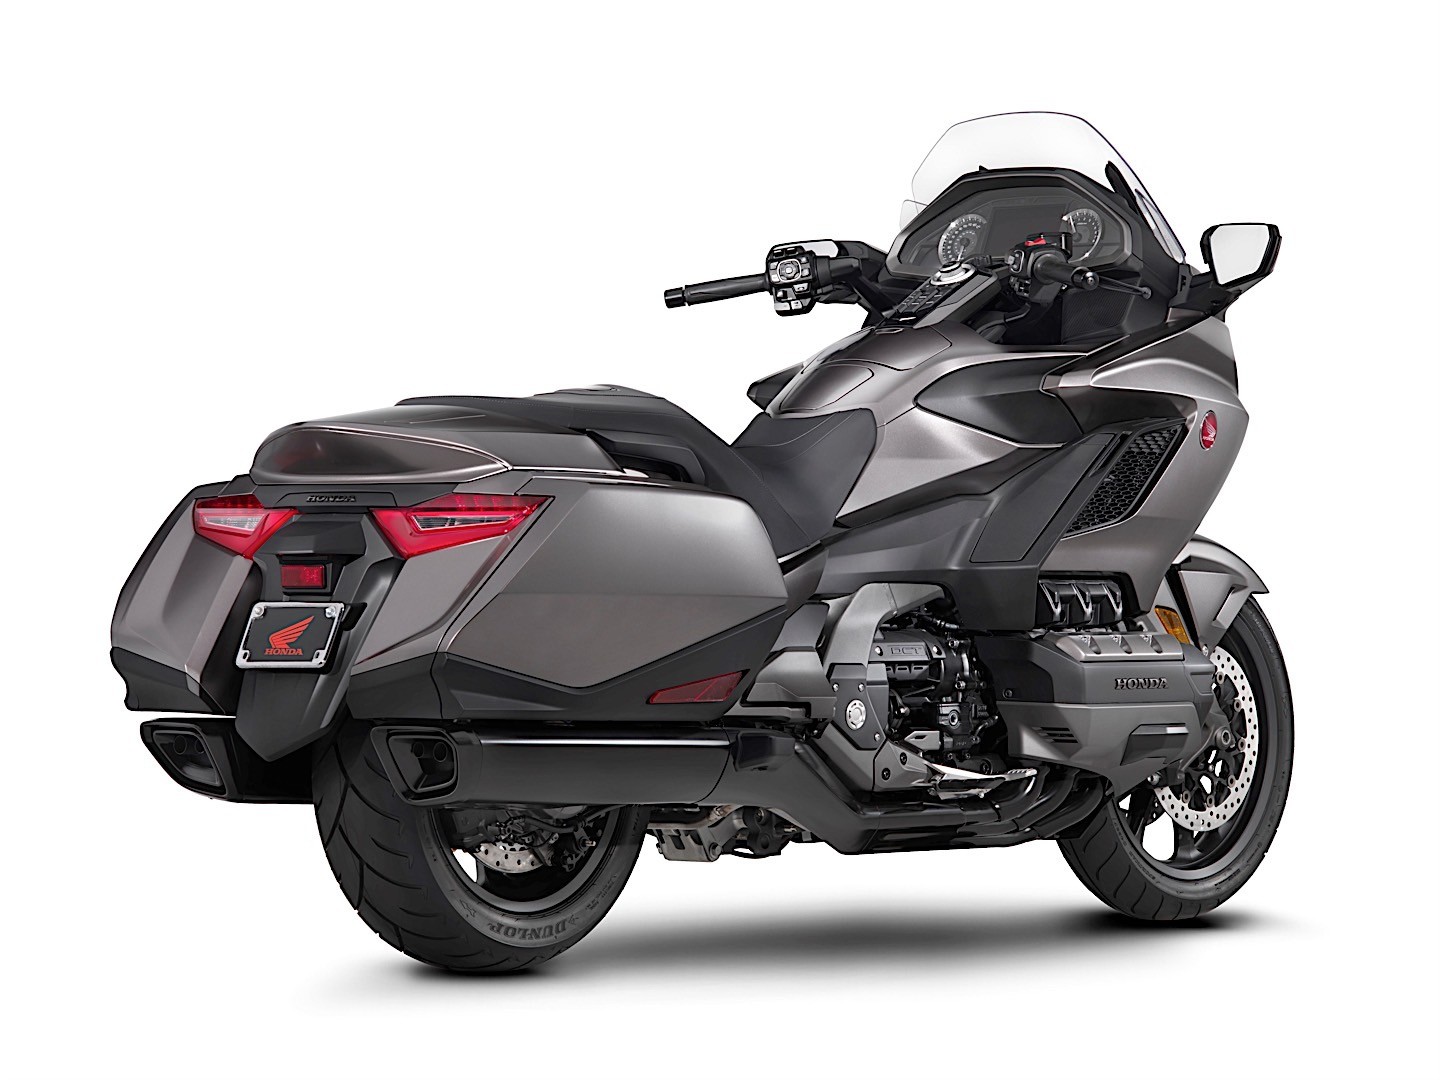 2018 Honda Gold Wing Officially Revealed With Sharper Design ...